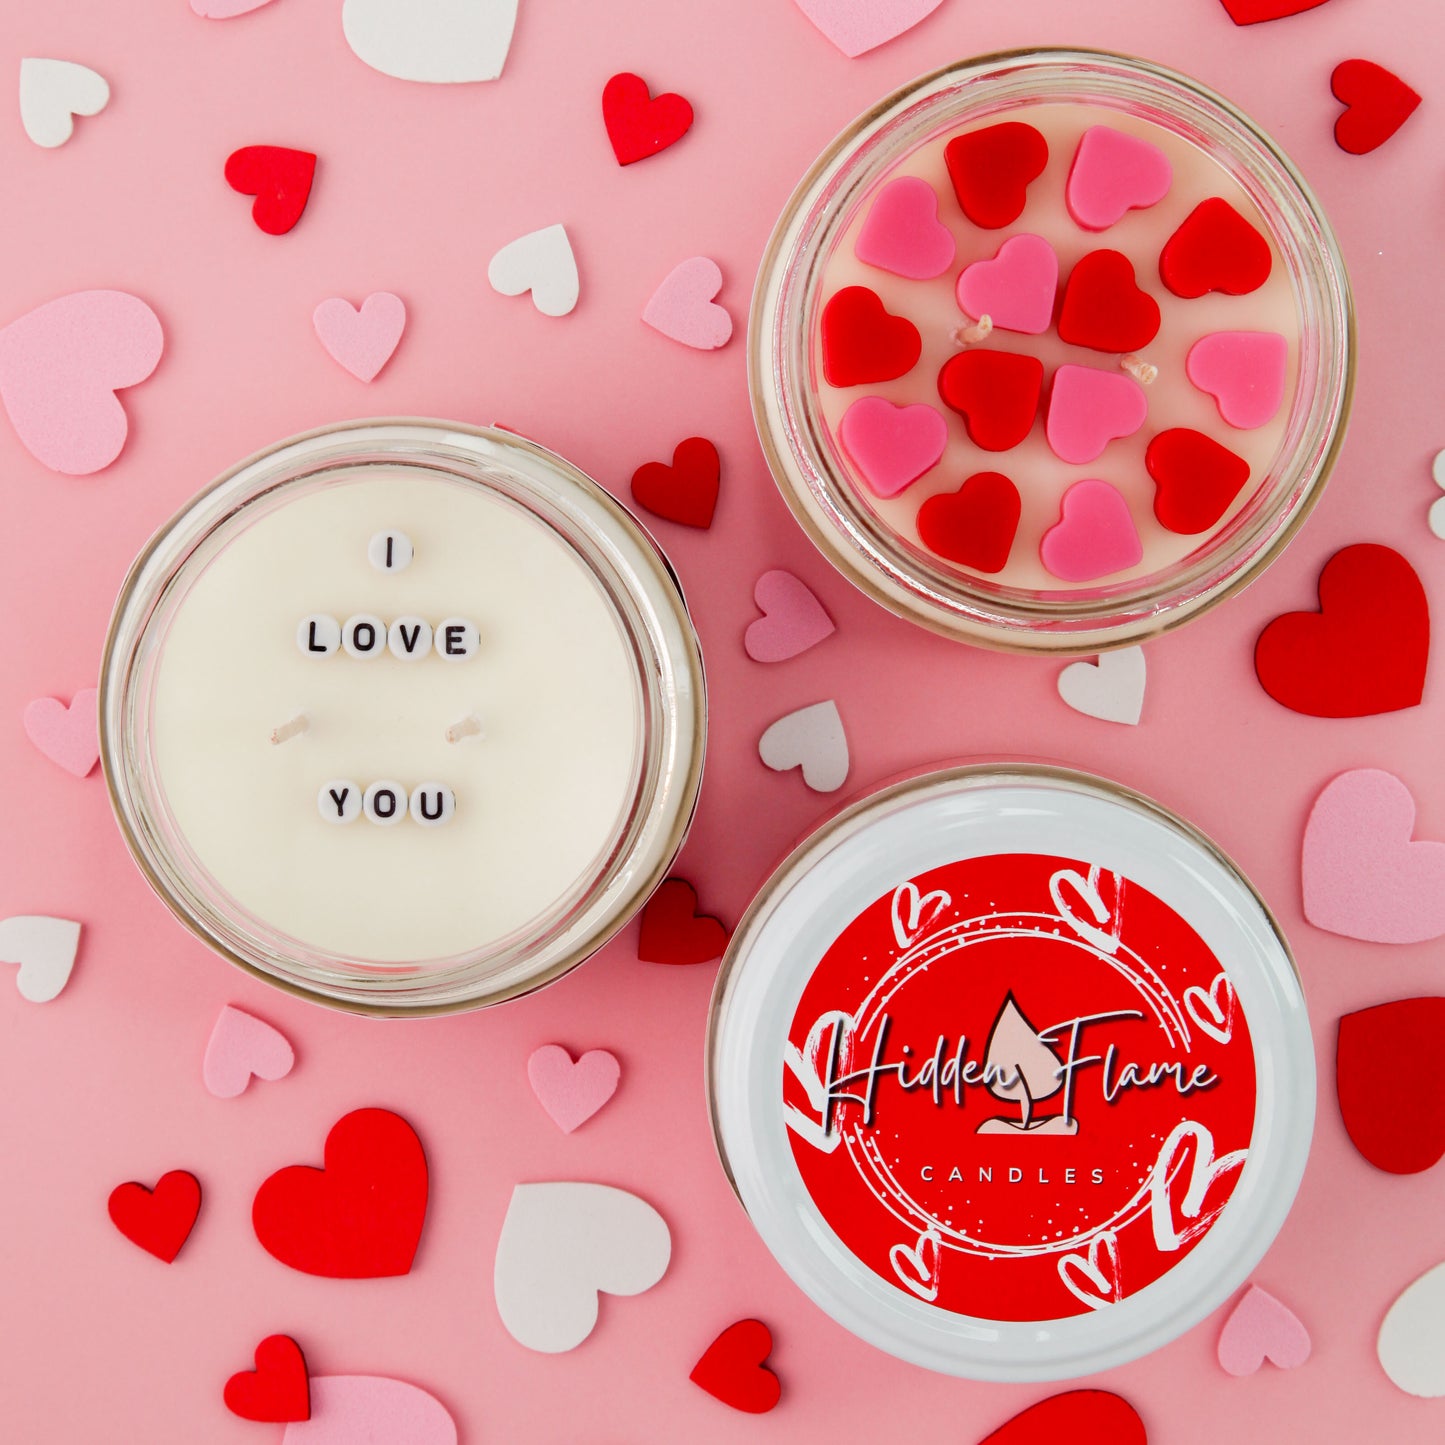 "I love you" Love Heart Candle